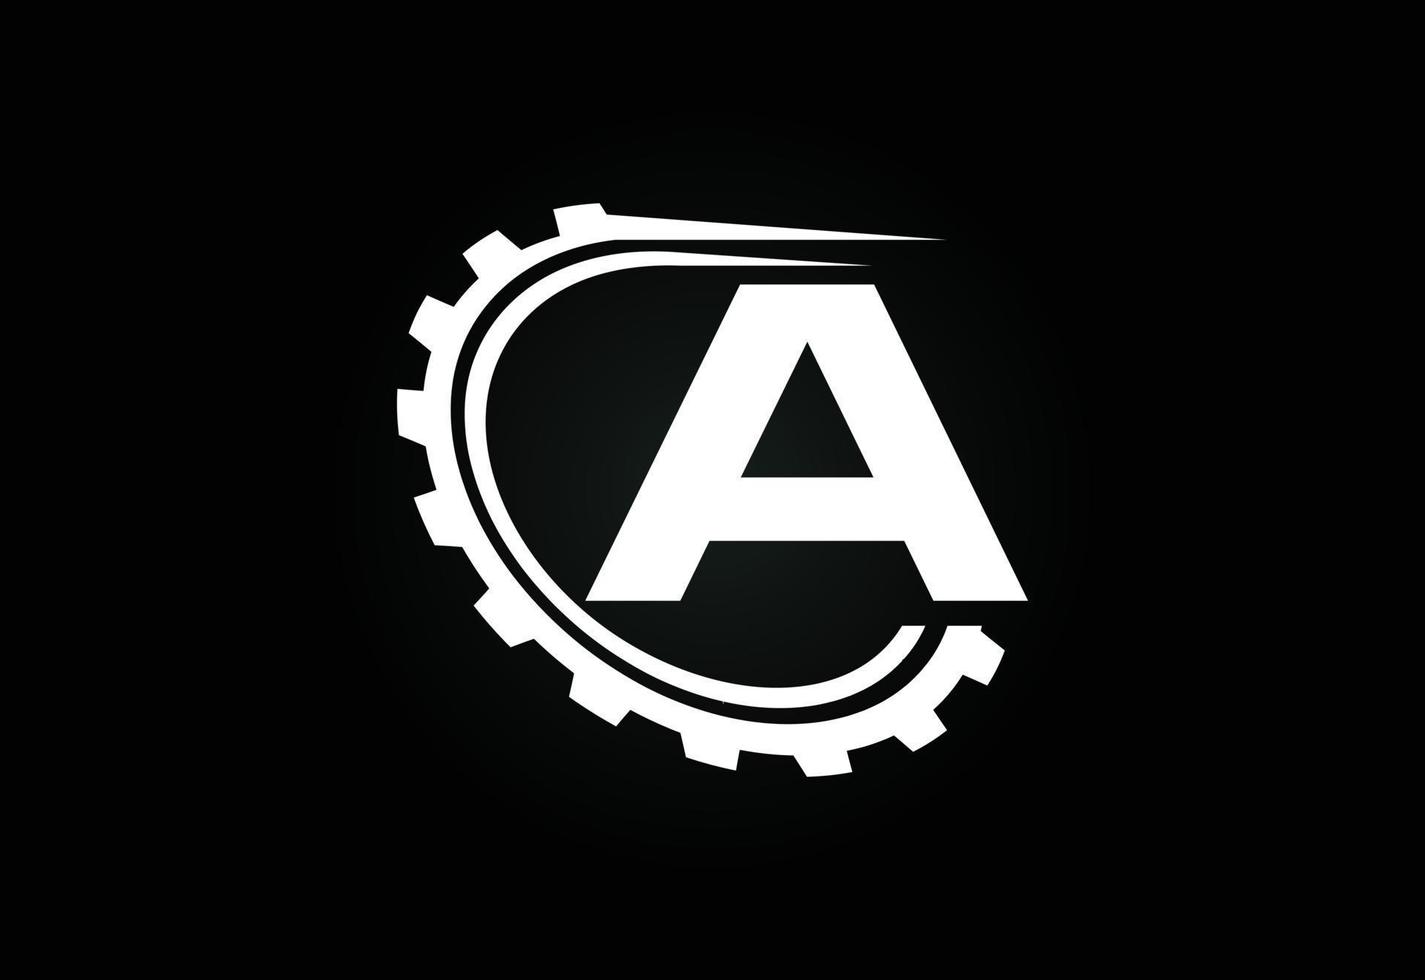 Initial A alphabet with a gear. Gear engineer logo design. Logo for automotive, mechanical, technology, setting, repair business, and company identity vector